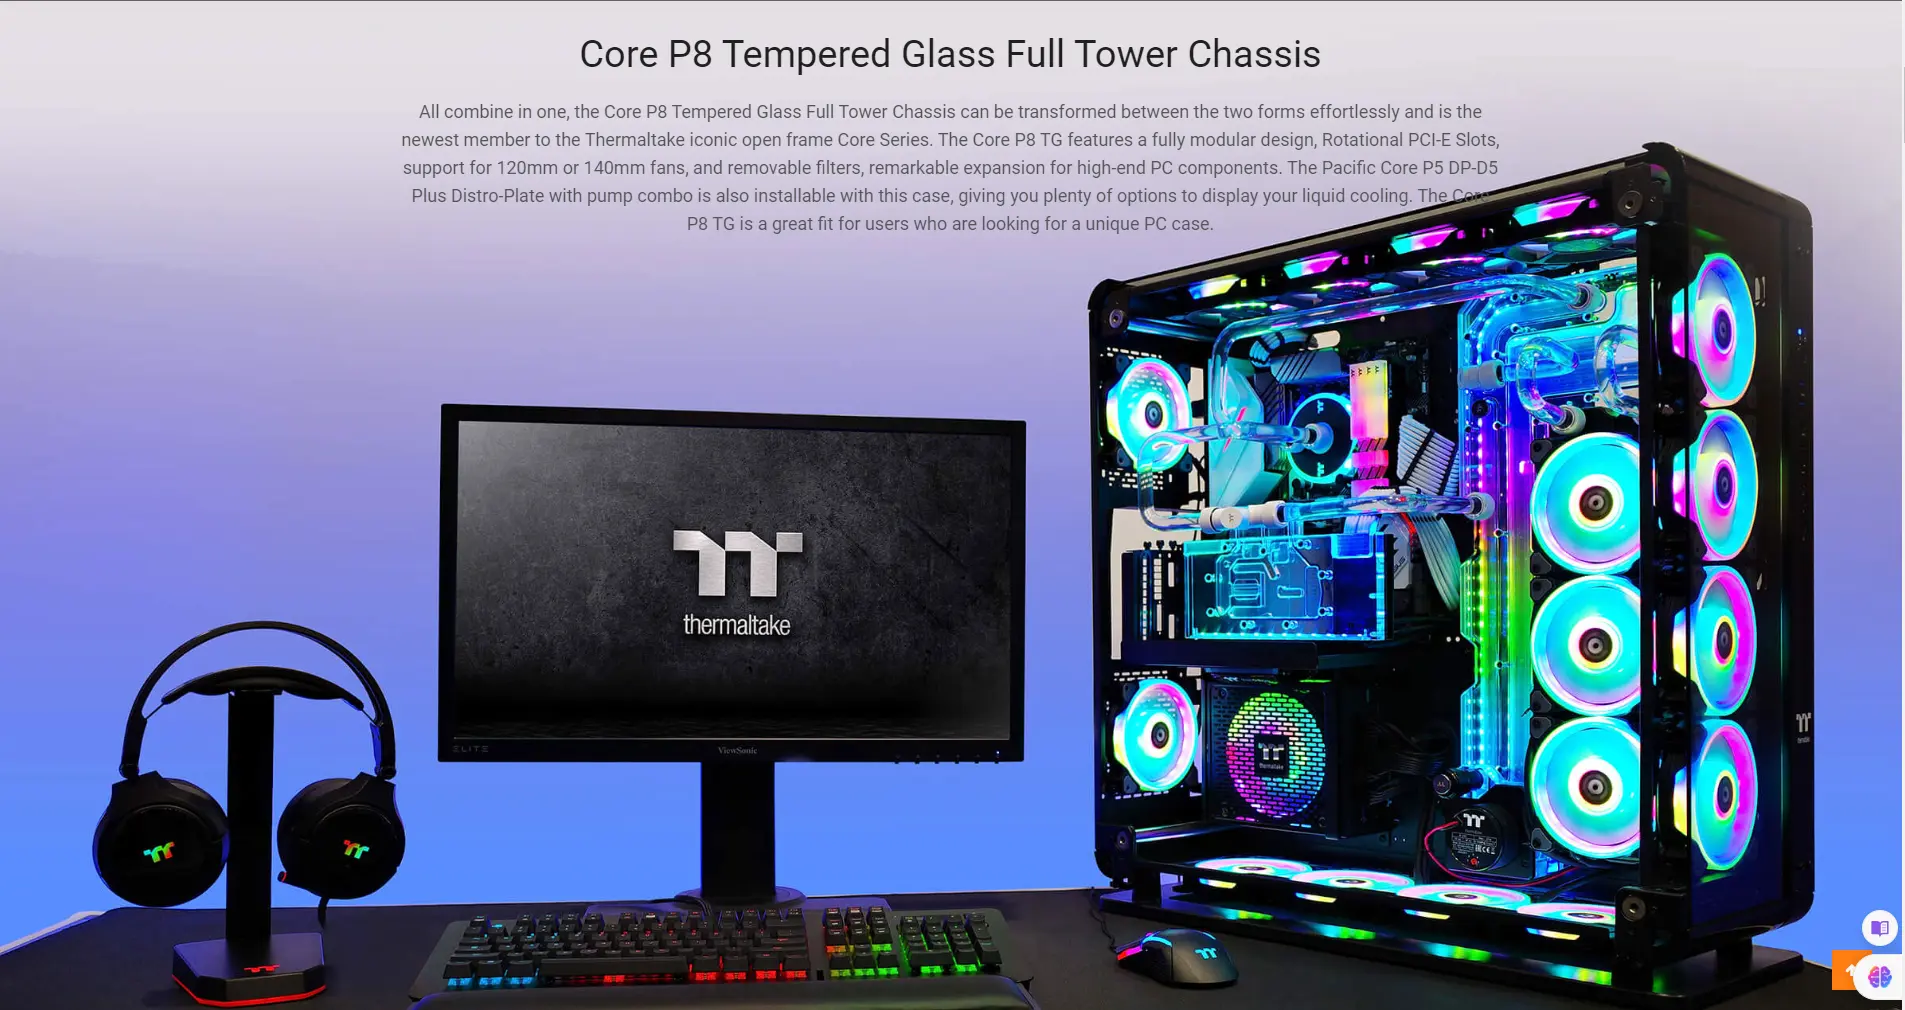 Best Price of Thermaltake core P8 Tempered Glass eATX Full Tower Computer Case. this is a full tower gaming computer case, color - black, e atx.